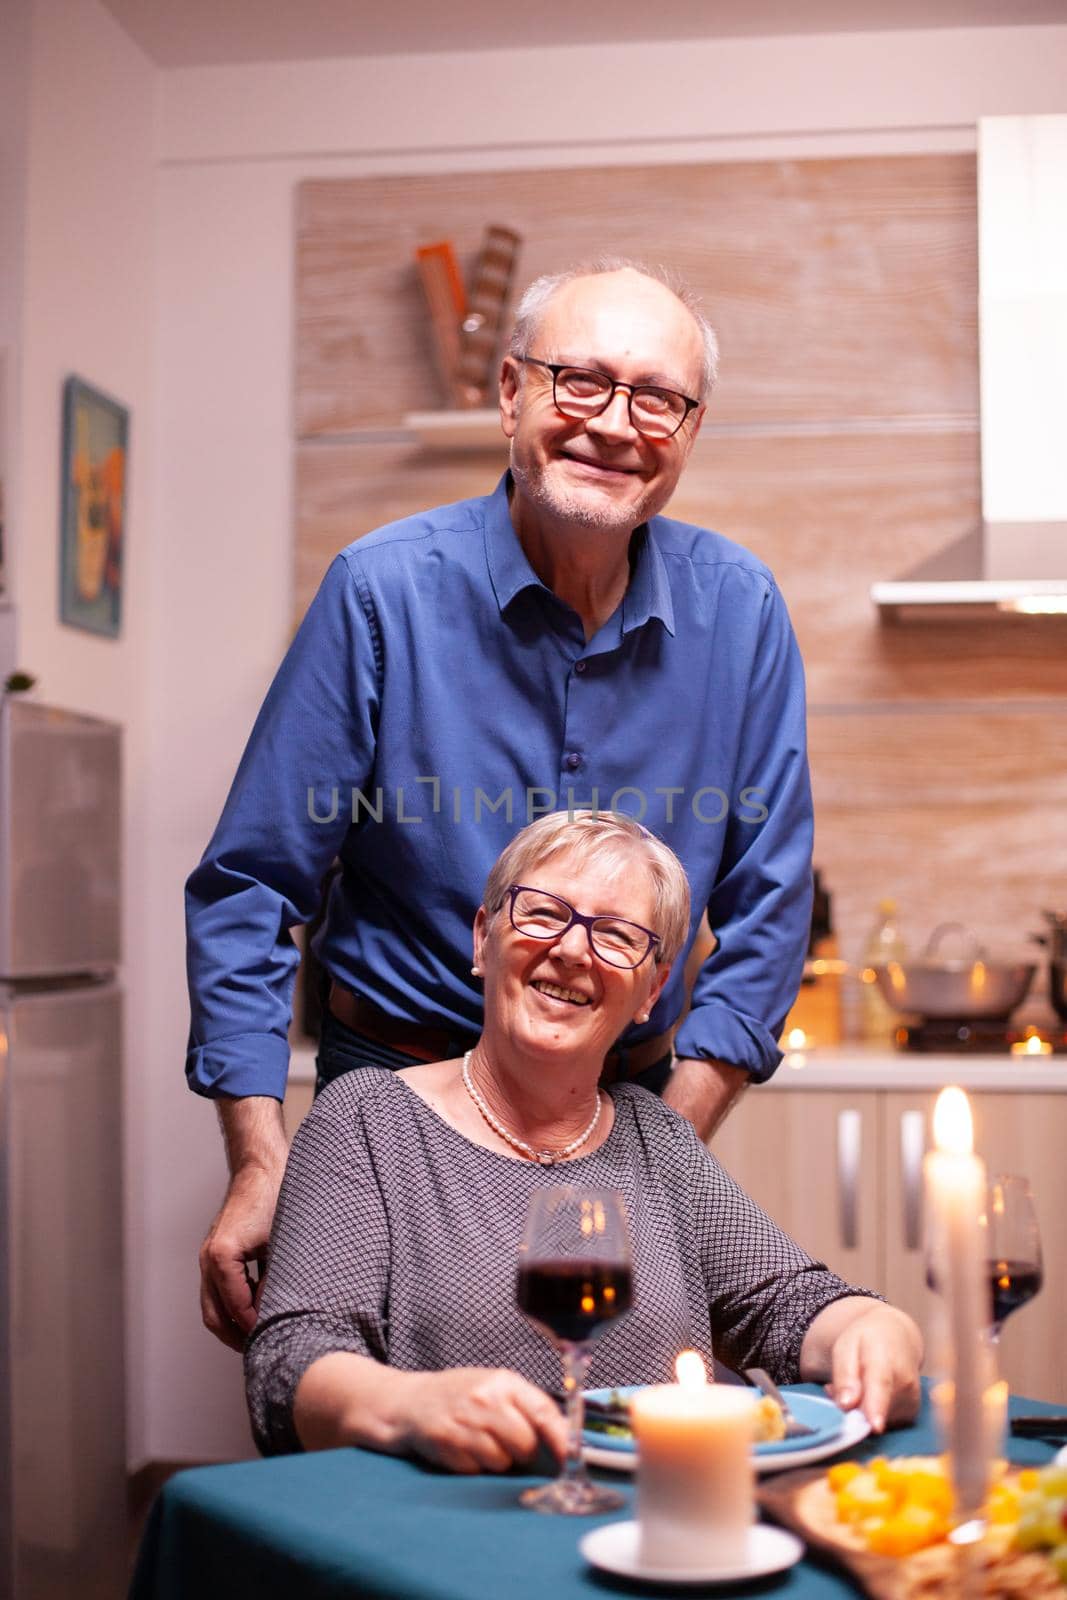 Excited disabled woman in wheelchair and her husband behind her looking at camera. Happy cheerful senior elderly couple dining together in the cozy kitchen, enjoying the meal, celebrating their anniversary.